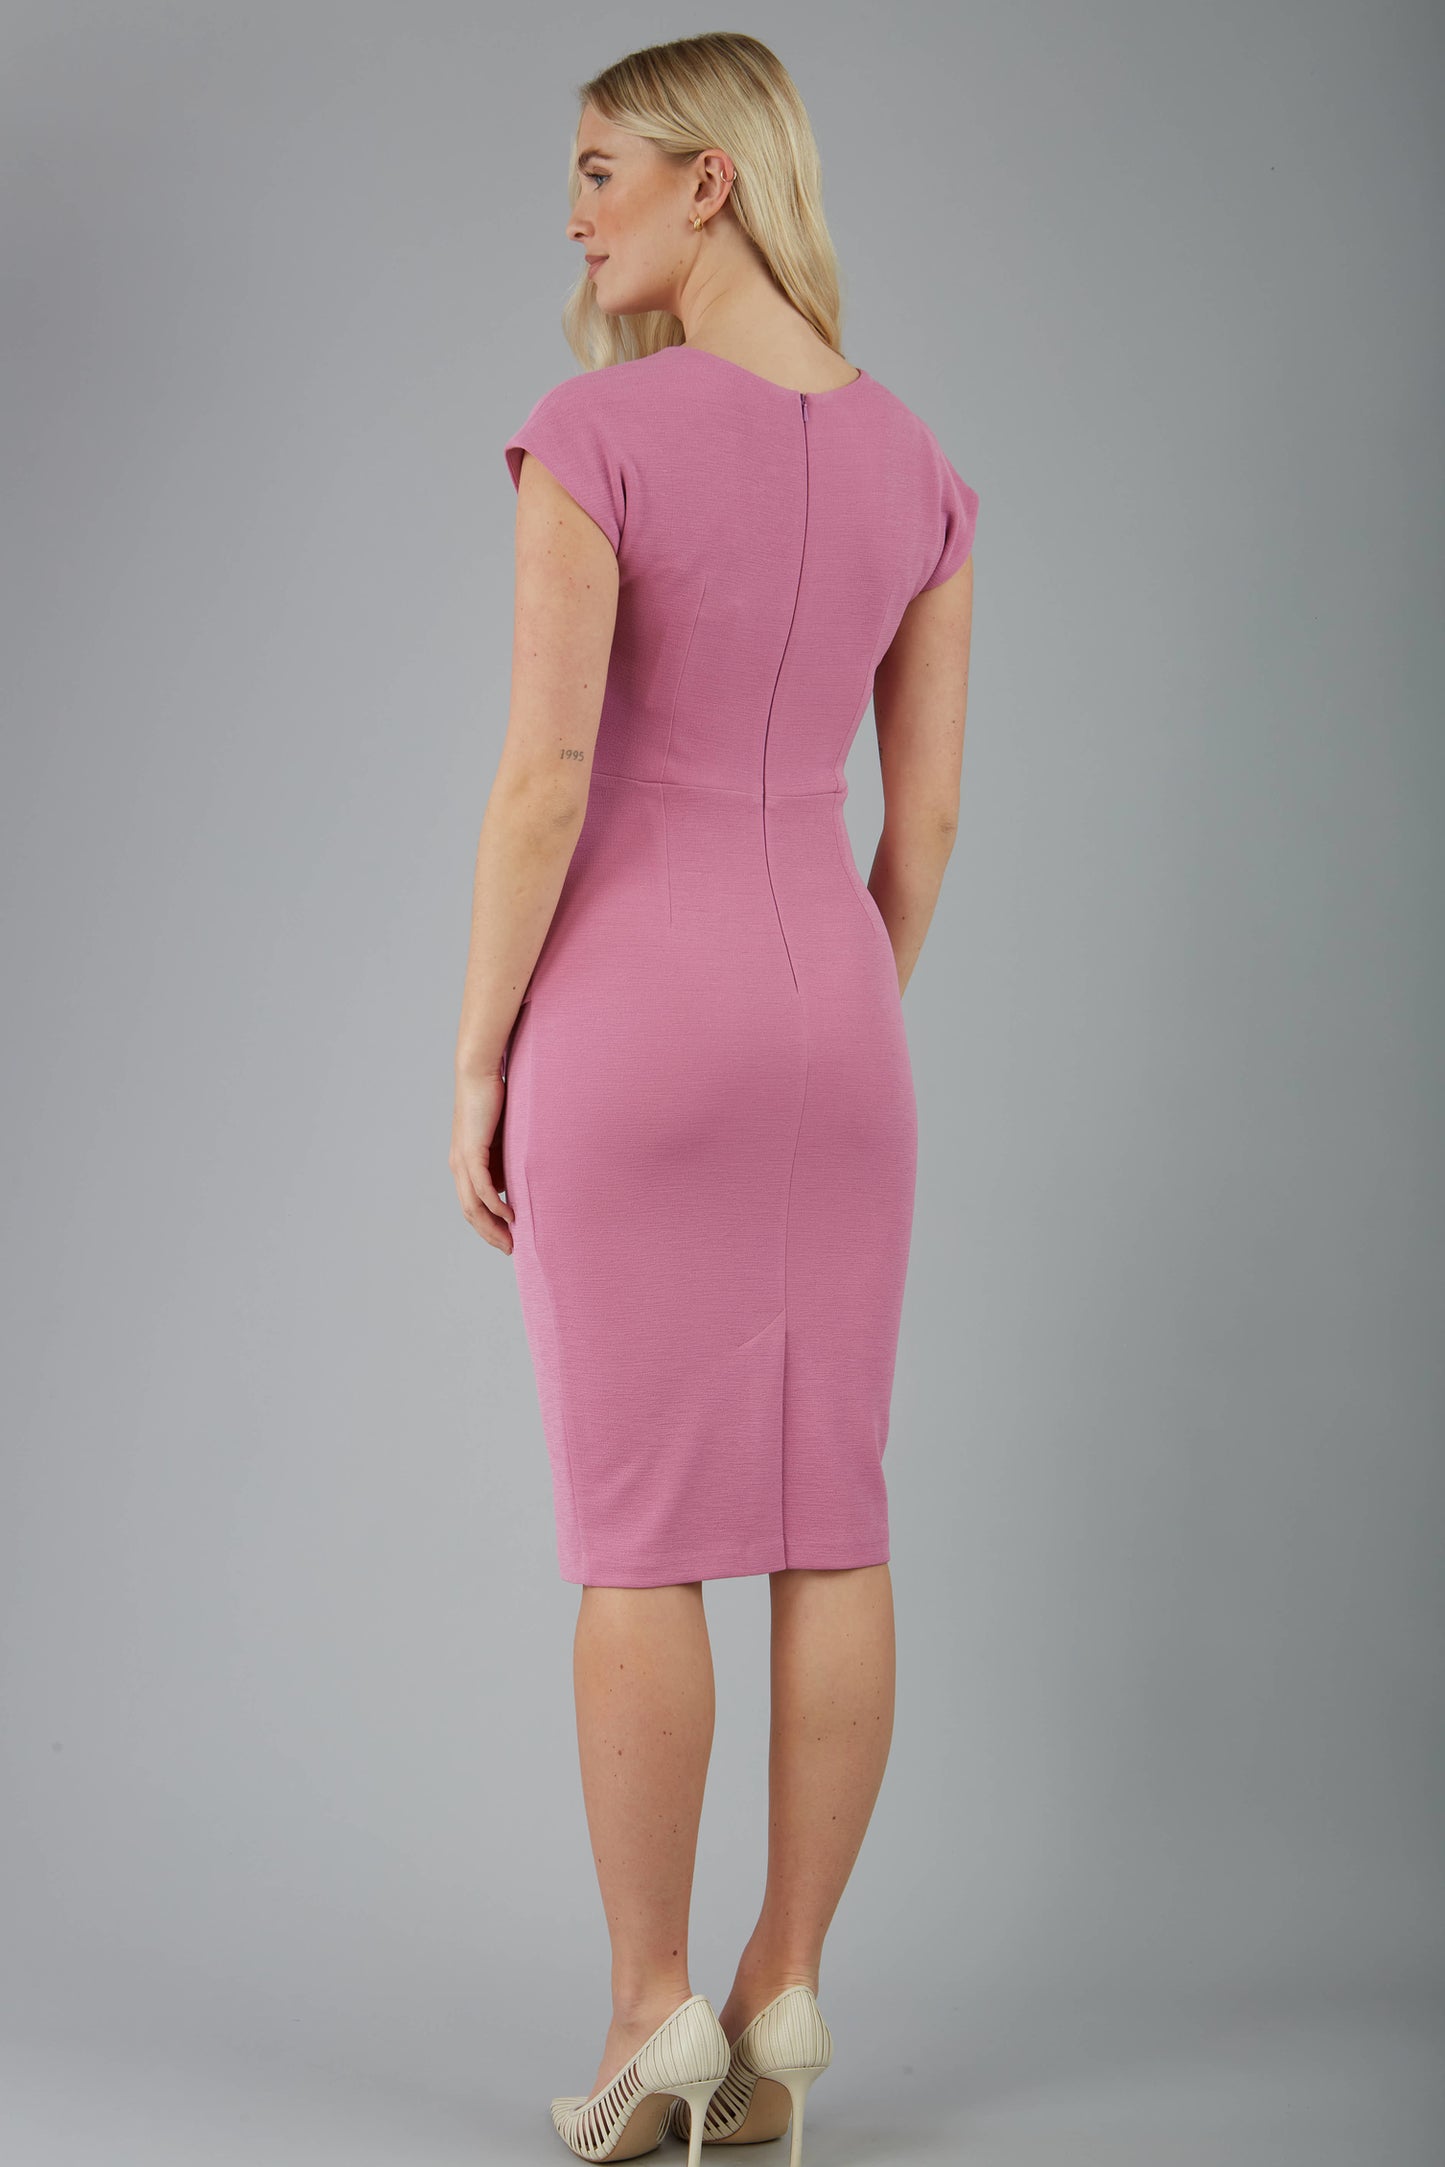 model is wearing diva catwalk Ester cap sleeve pencil dress with v-neck and bow detail at the front in cashmere pink back